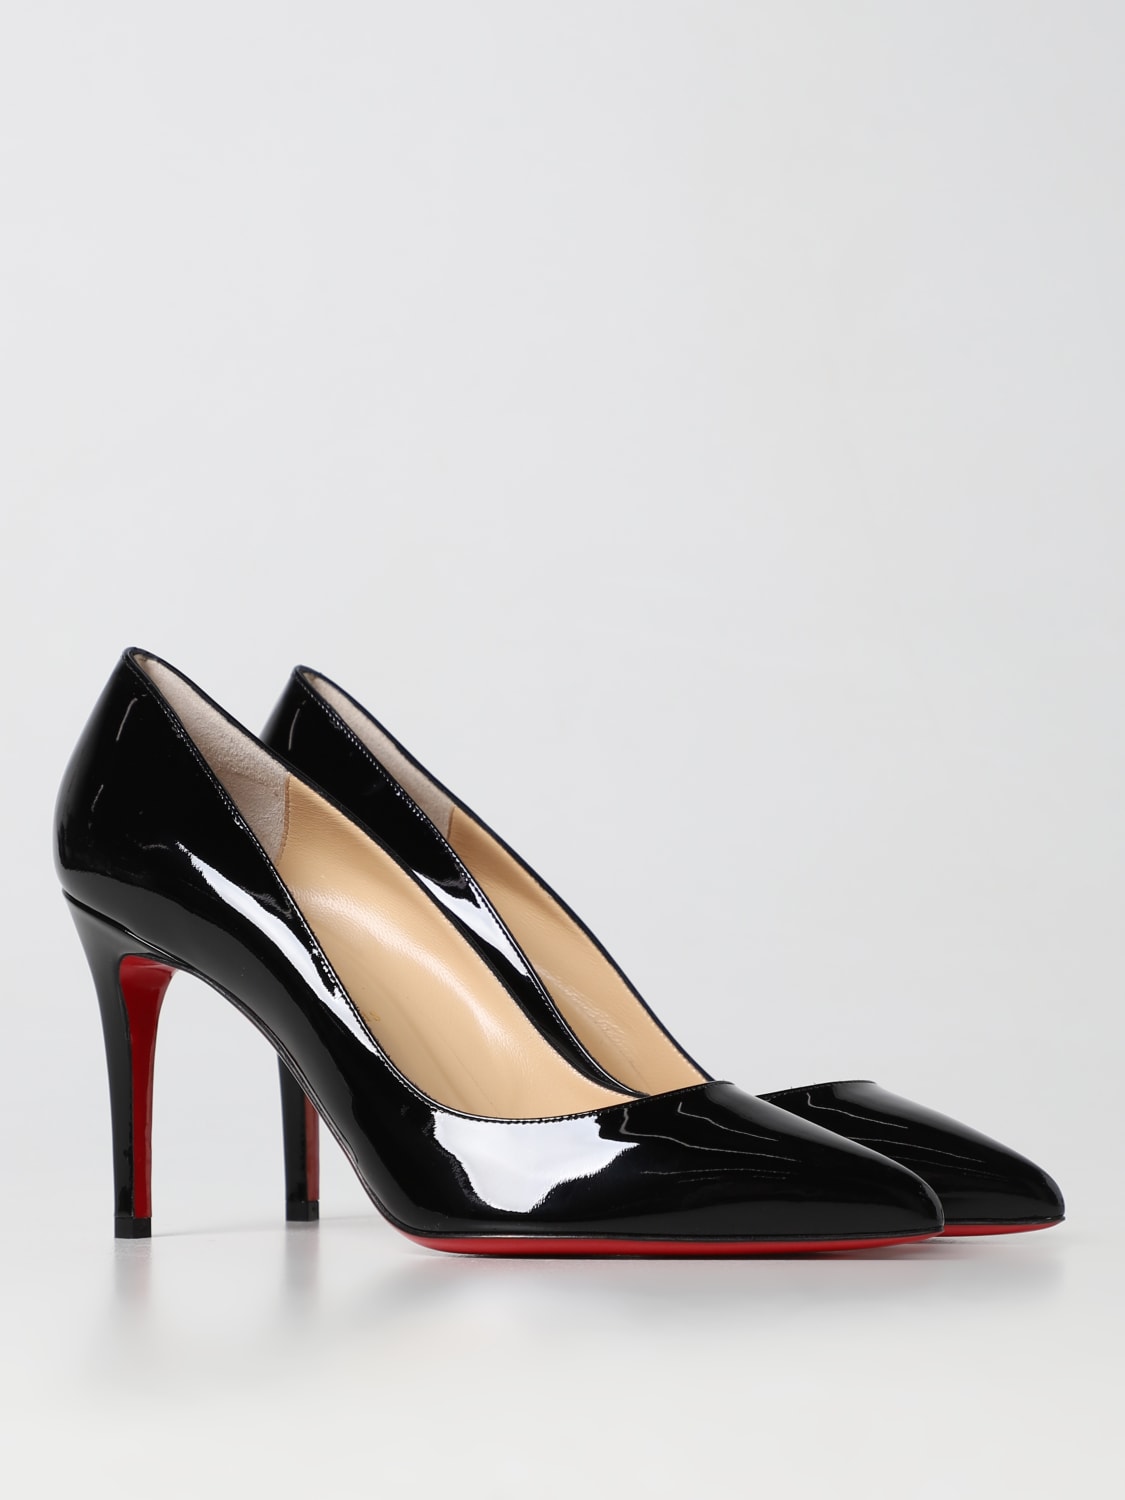 Christian Louboutin Black Patent Leather Pigalle Pointed Toe Pumps